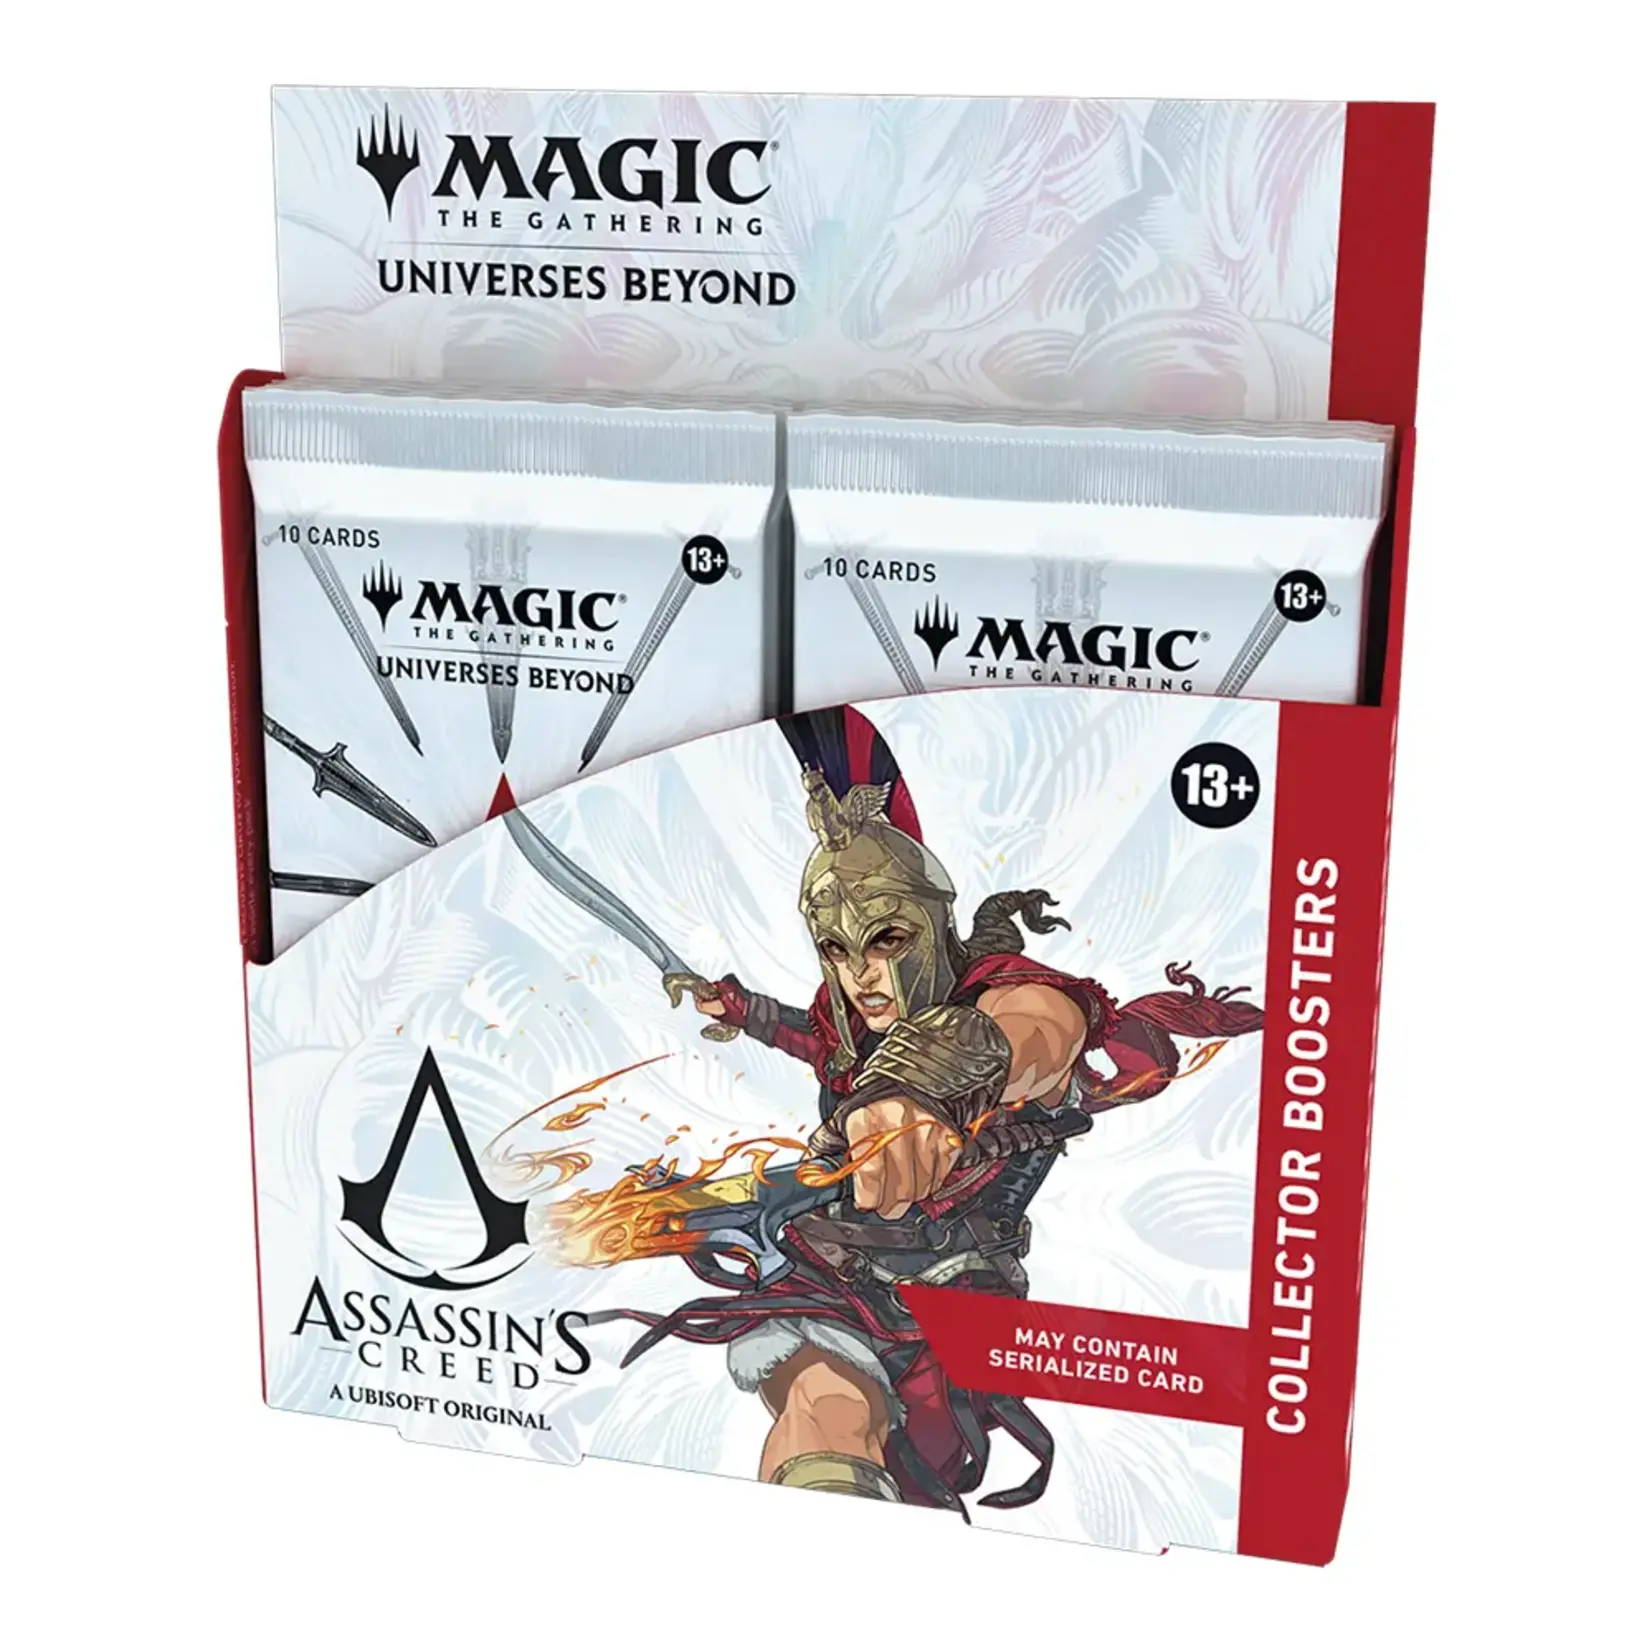 Magic the gathering ( Preorder: Releases - 05/07) Assassin's Creed: Collector's Booster Display